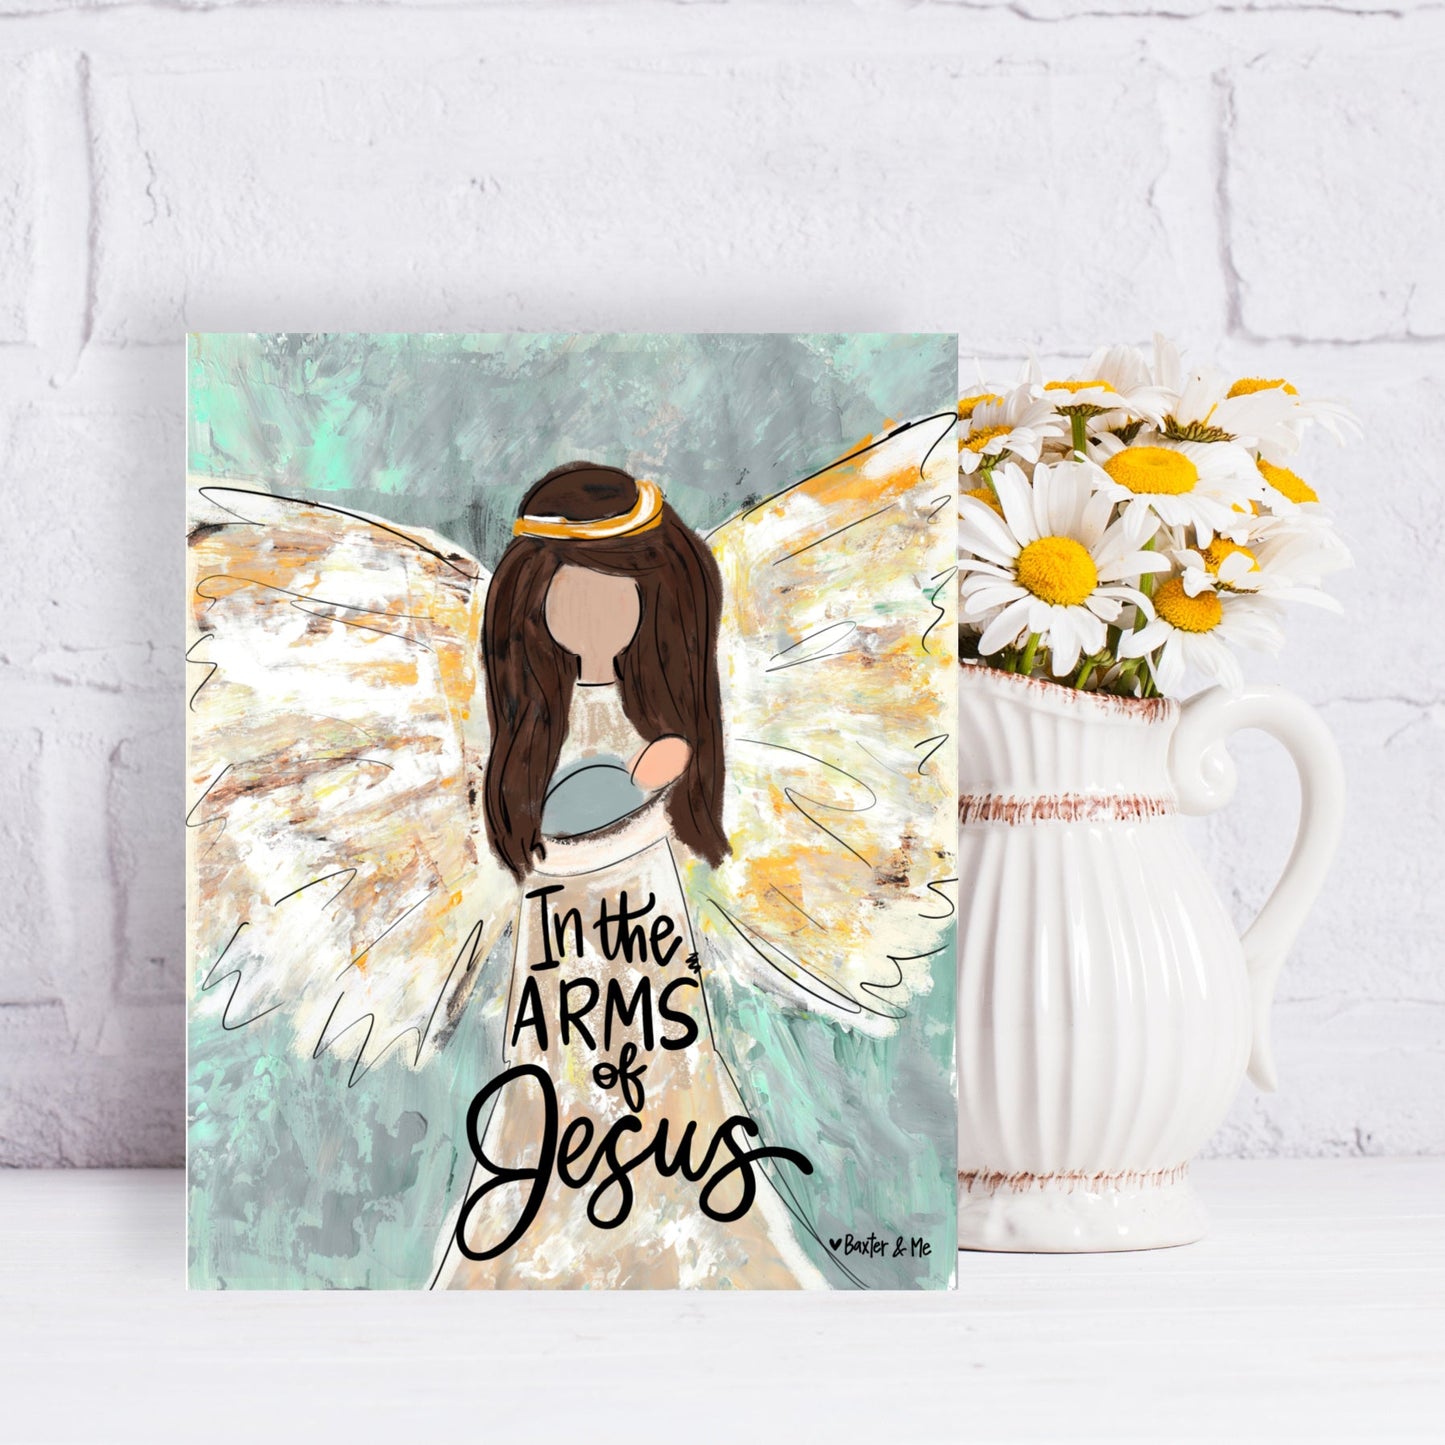 In the Arms of Jesus Wrapped Canvas